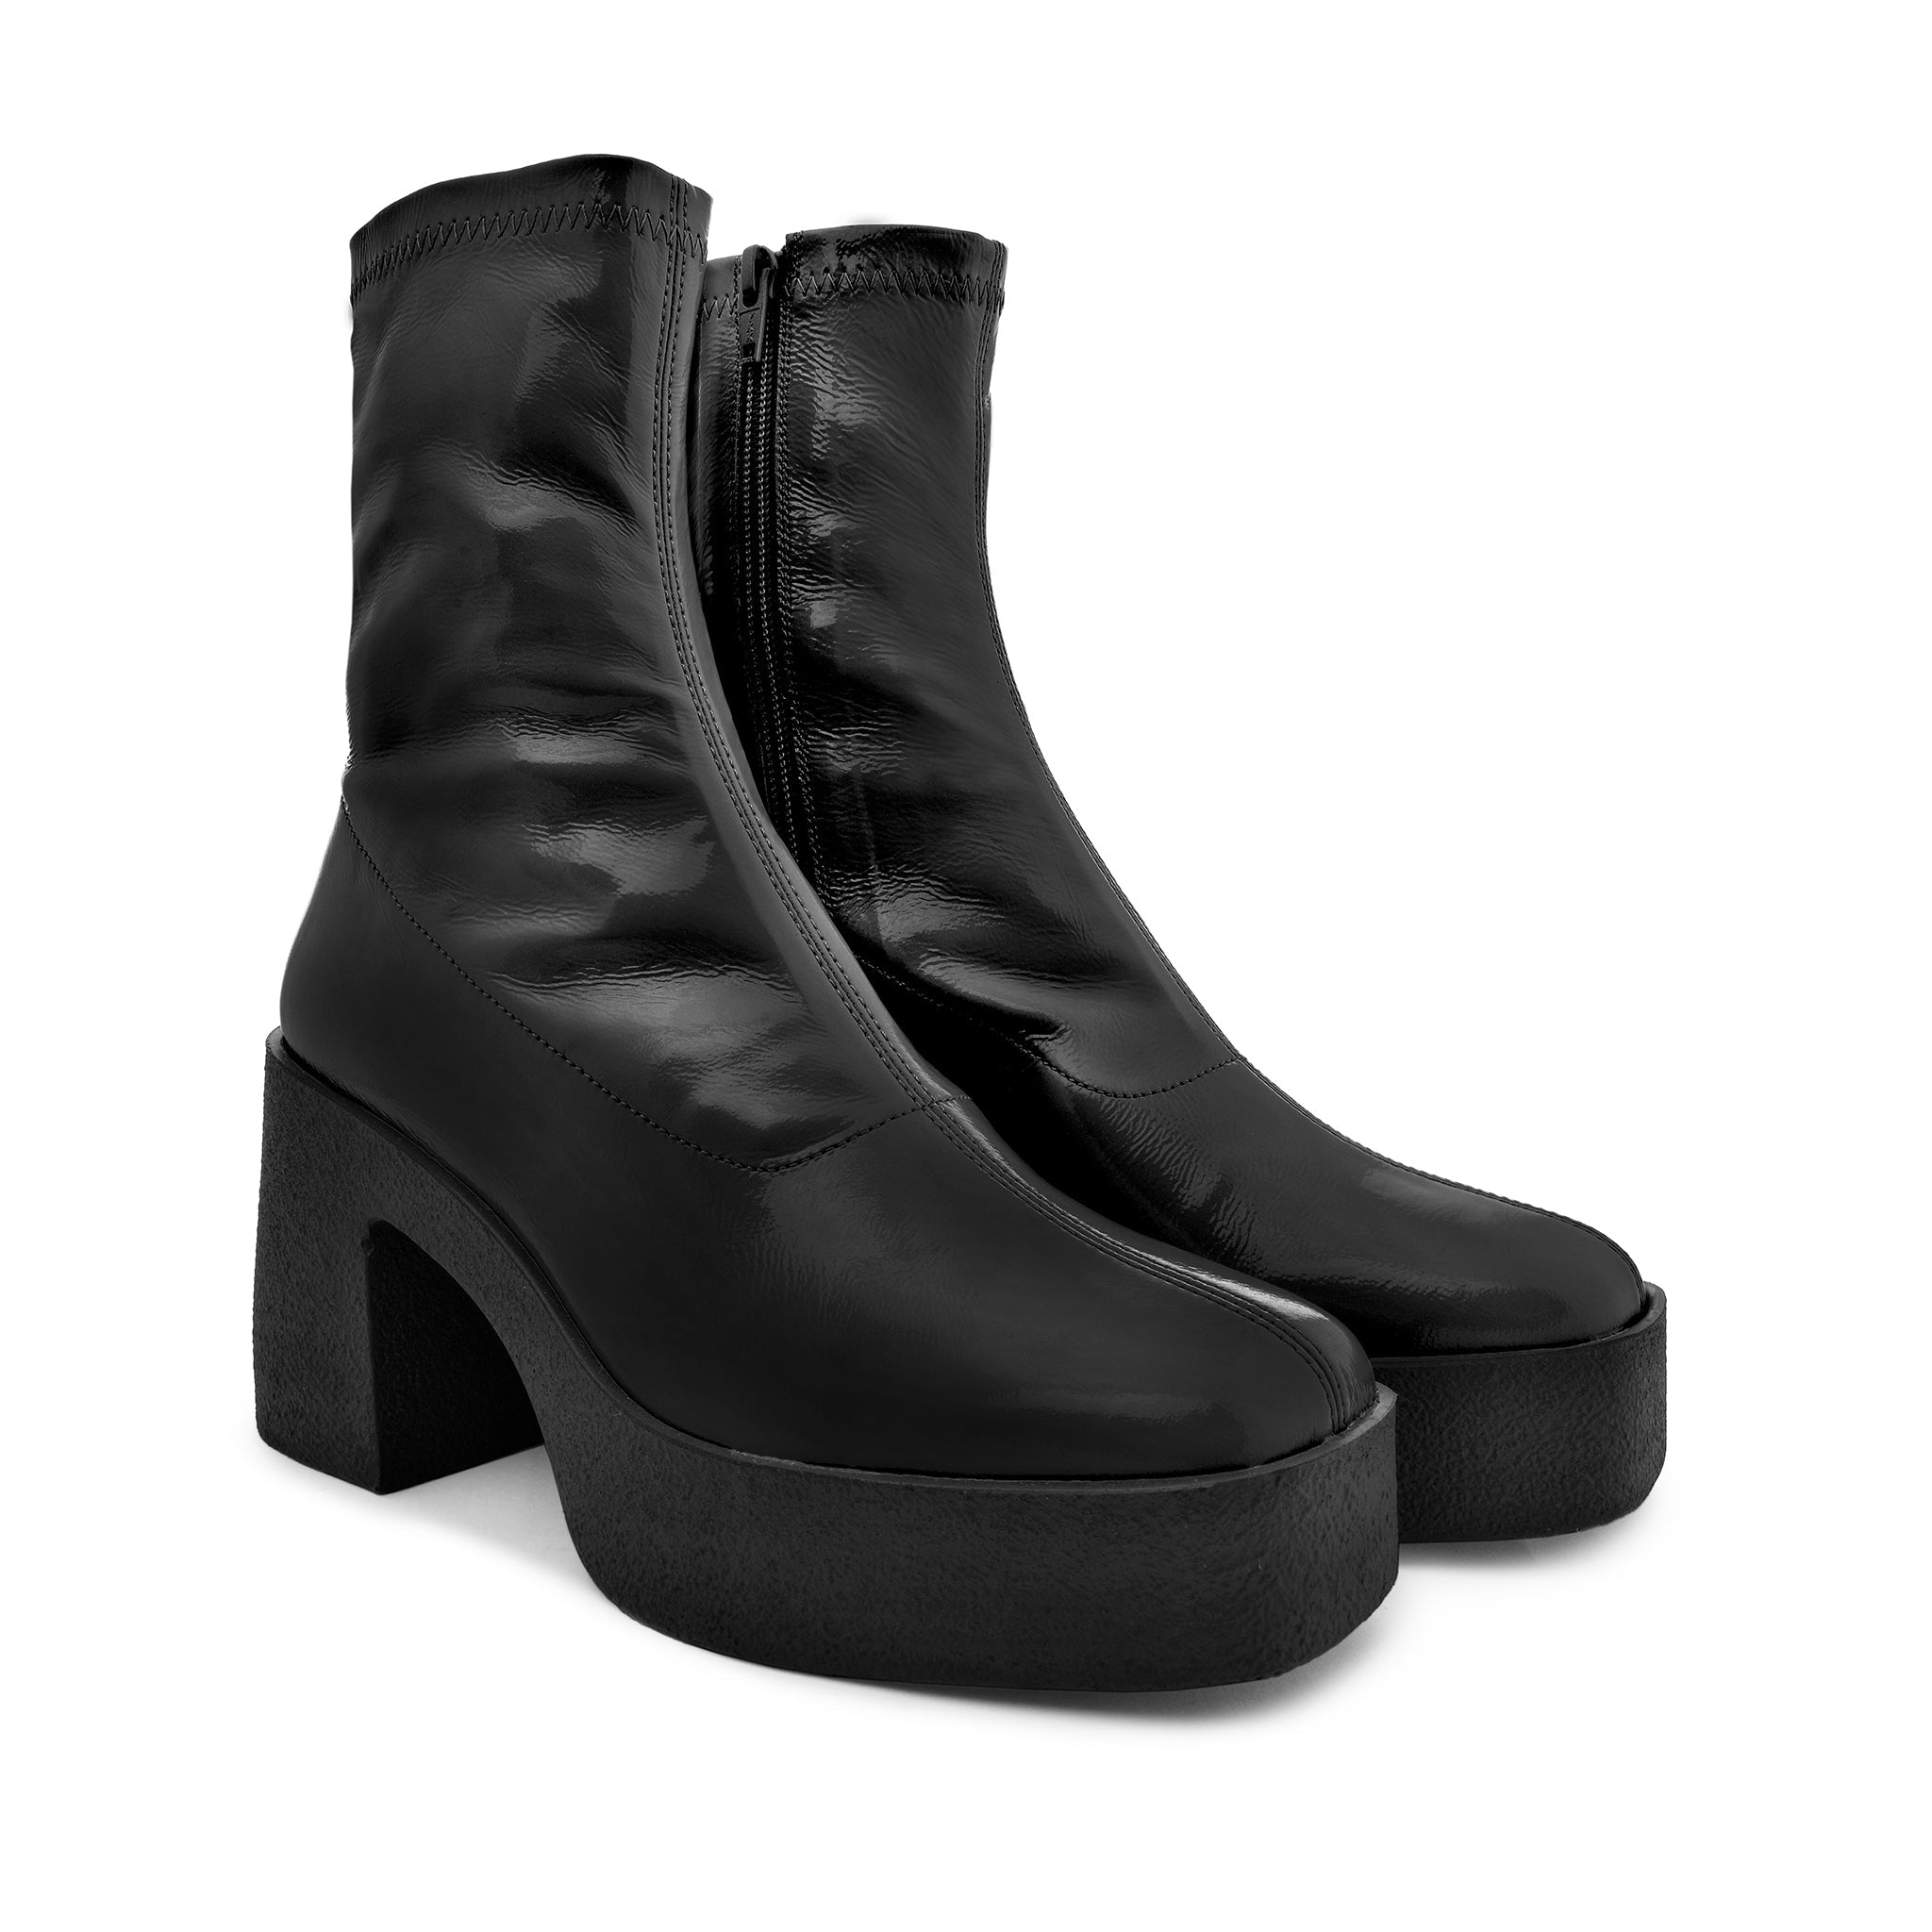 Umi Black Stretch Patent Chunky Ankle Boots 20077-02-12 - 8